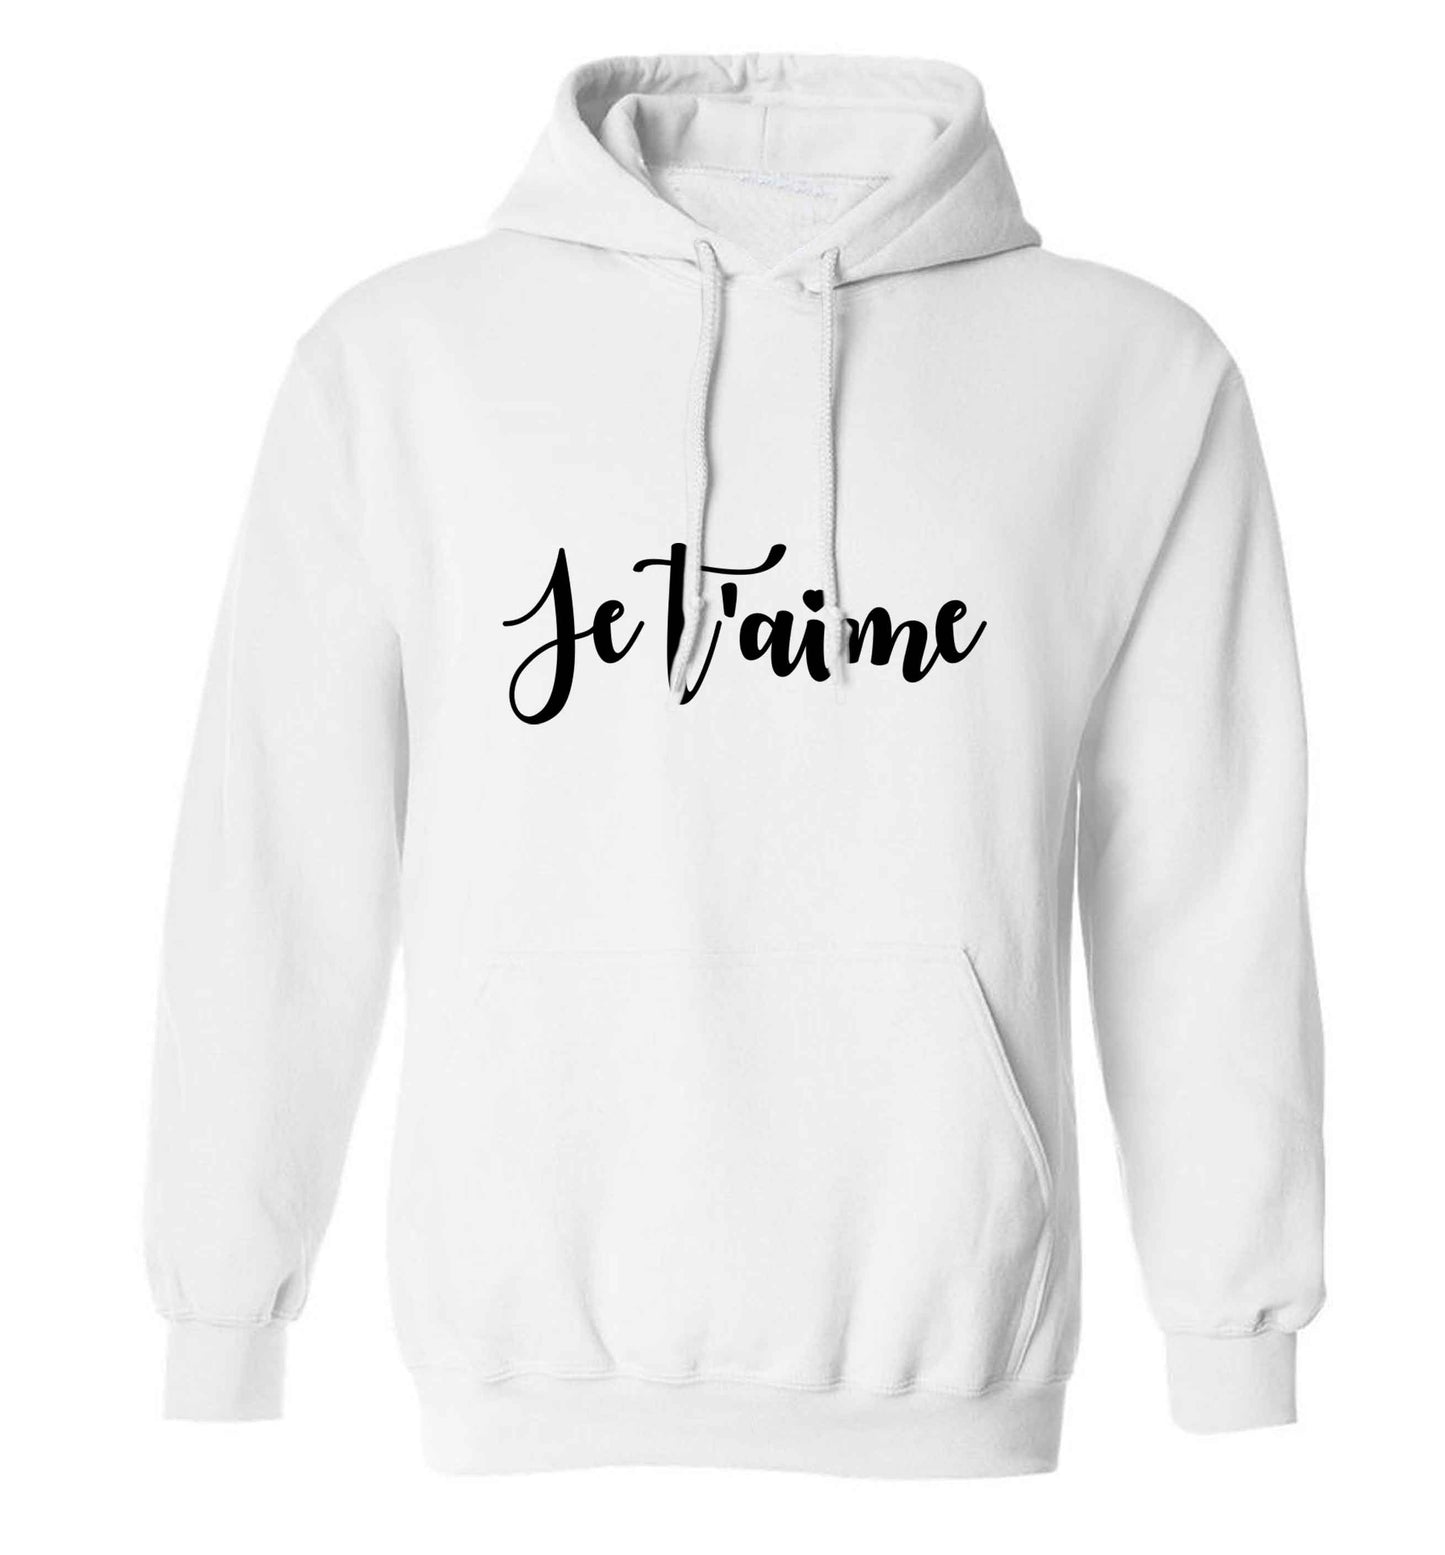 Je t'aime adults unisex white hoodie 2XL